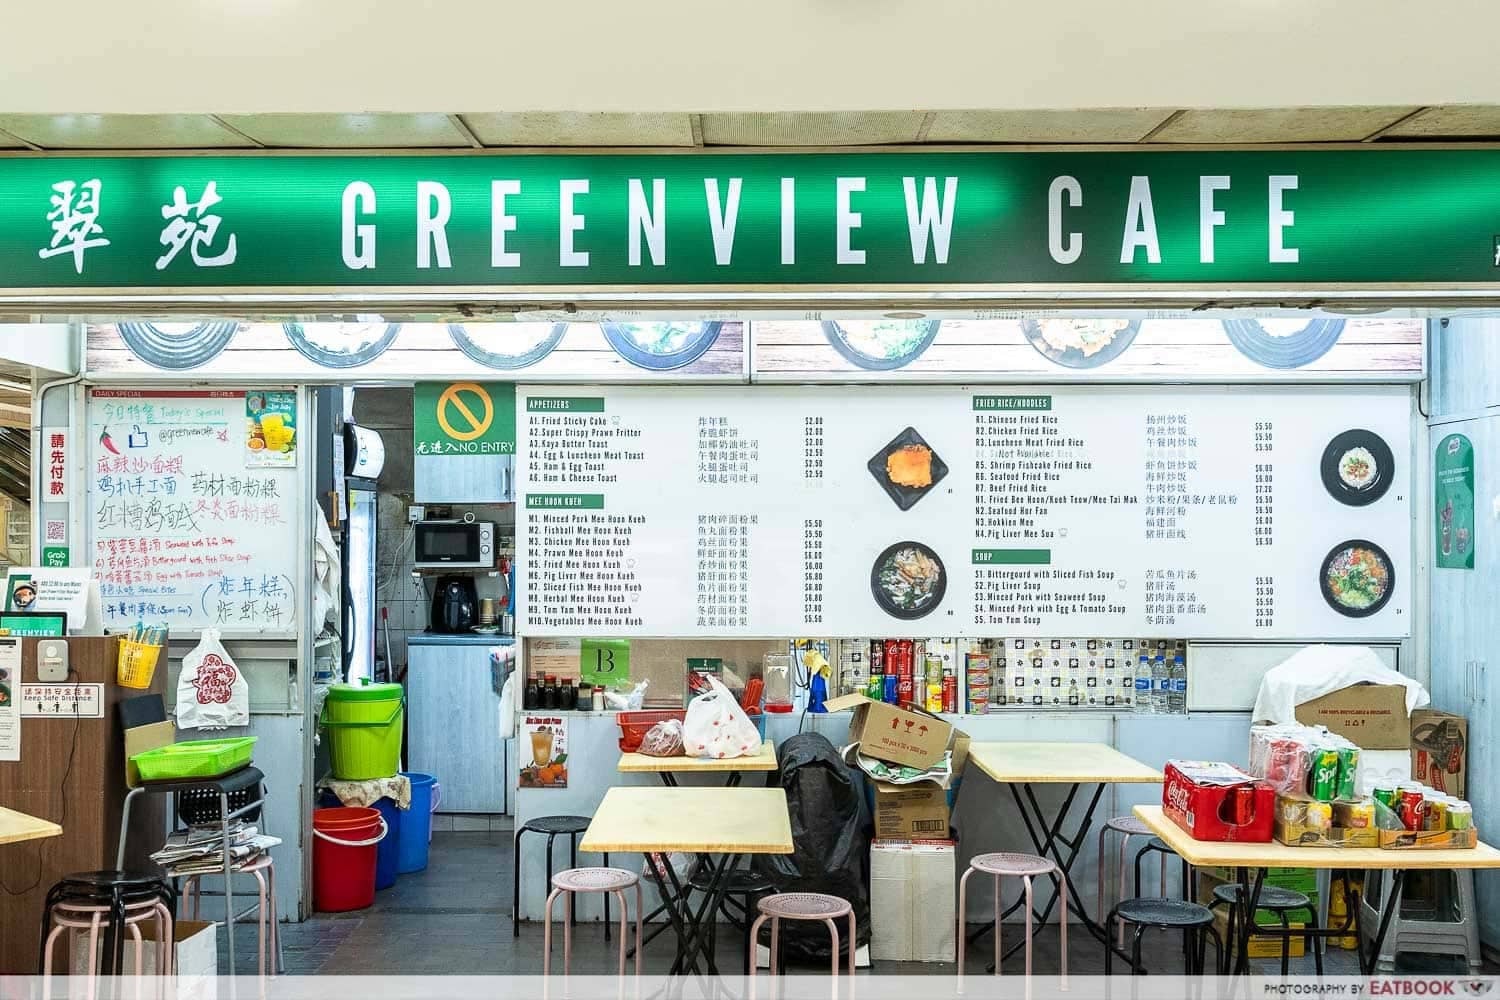 Greenview Cafe Storefront